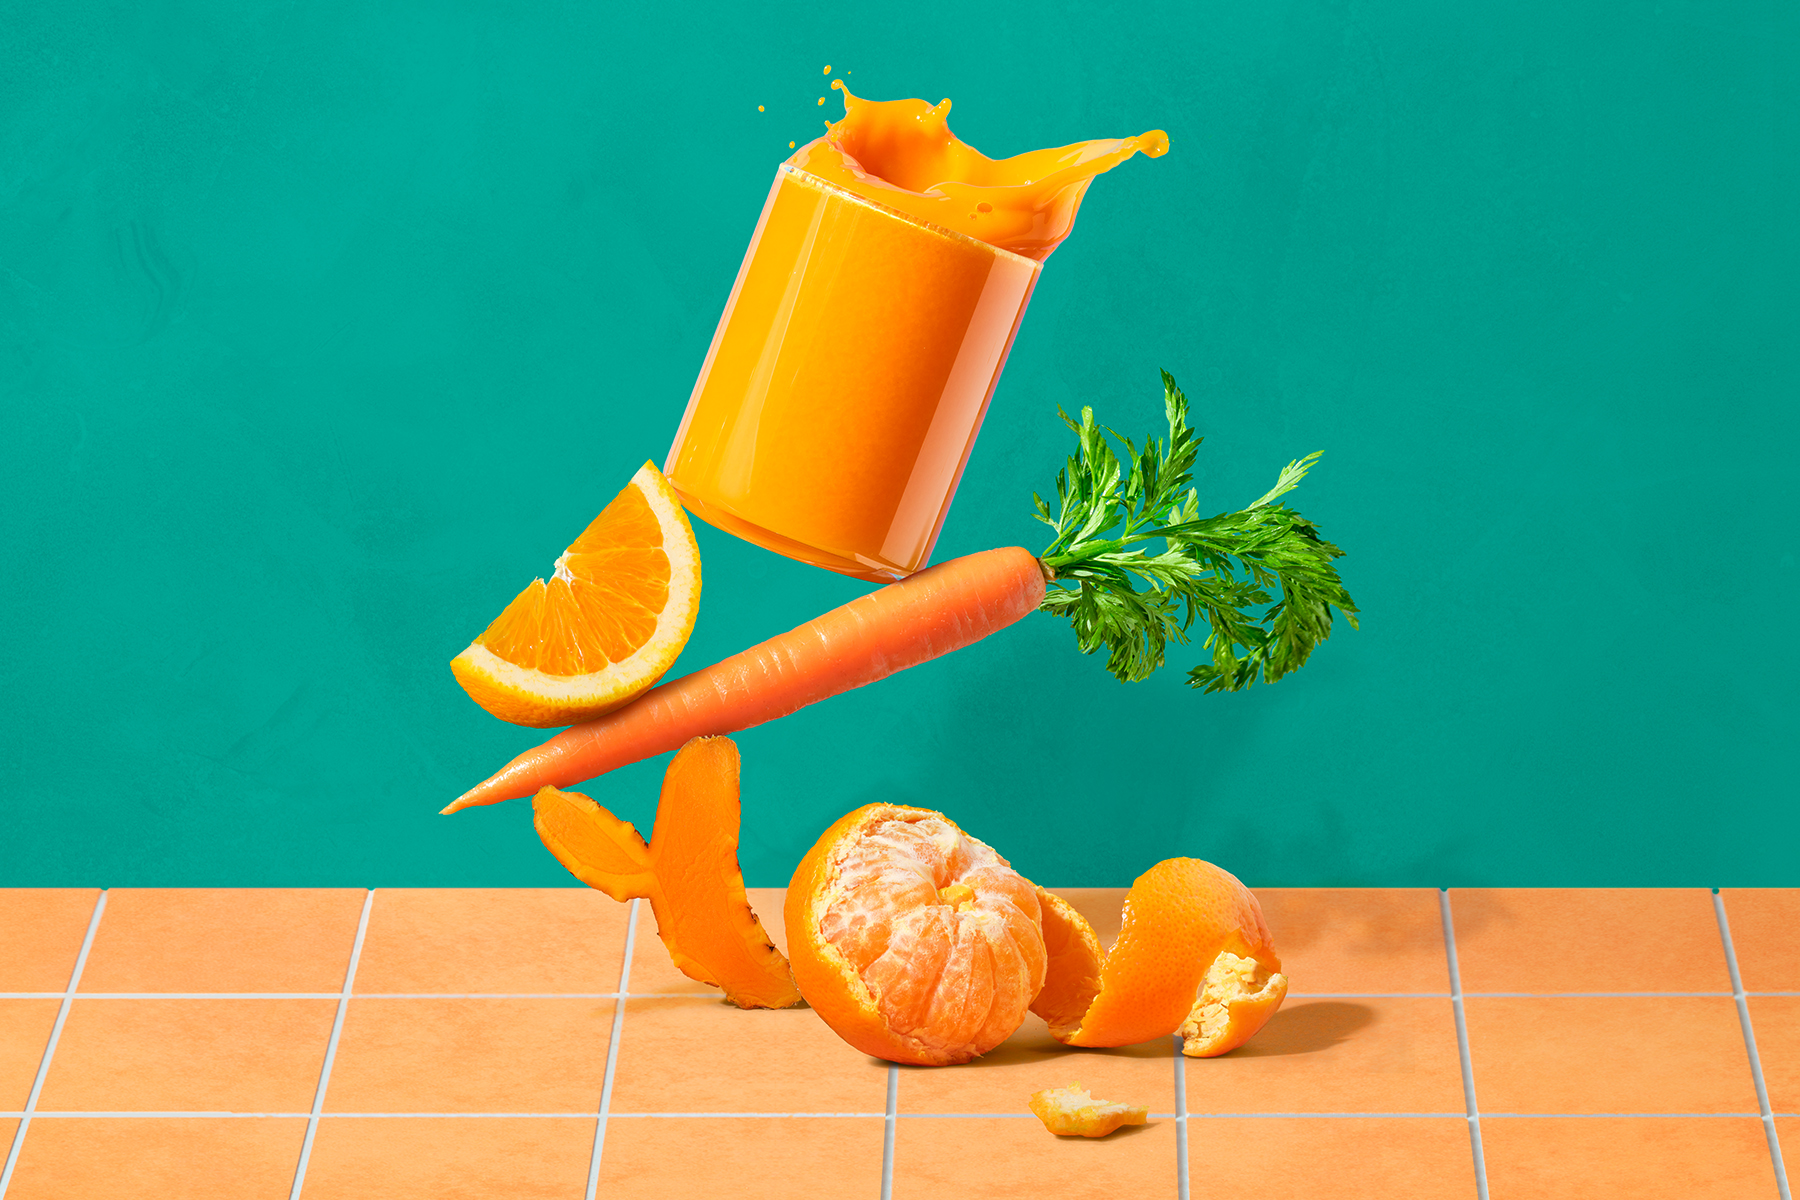 Glass of carrot, orange and turmeric juice sitting on top of those ingredients on an orange counter in front of a green background